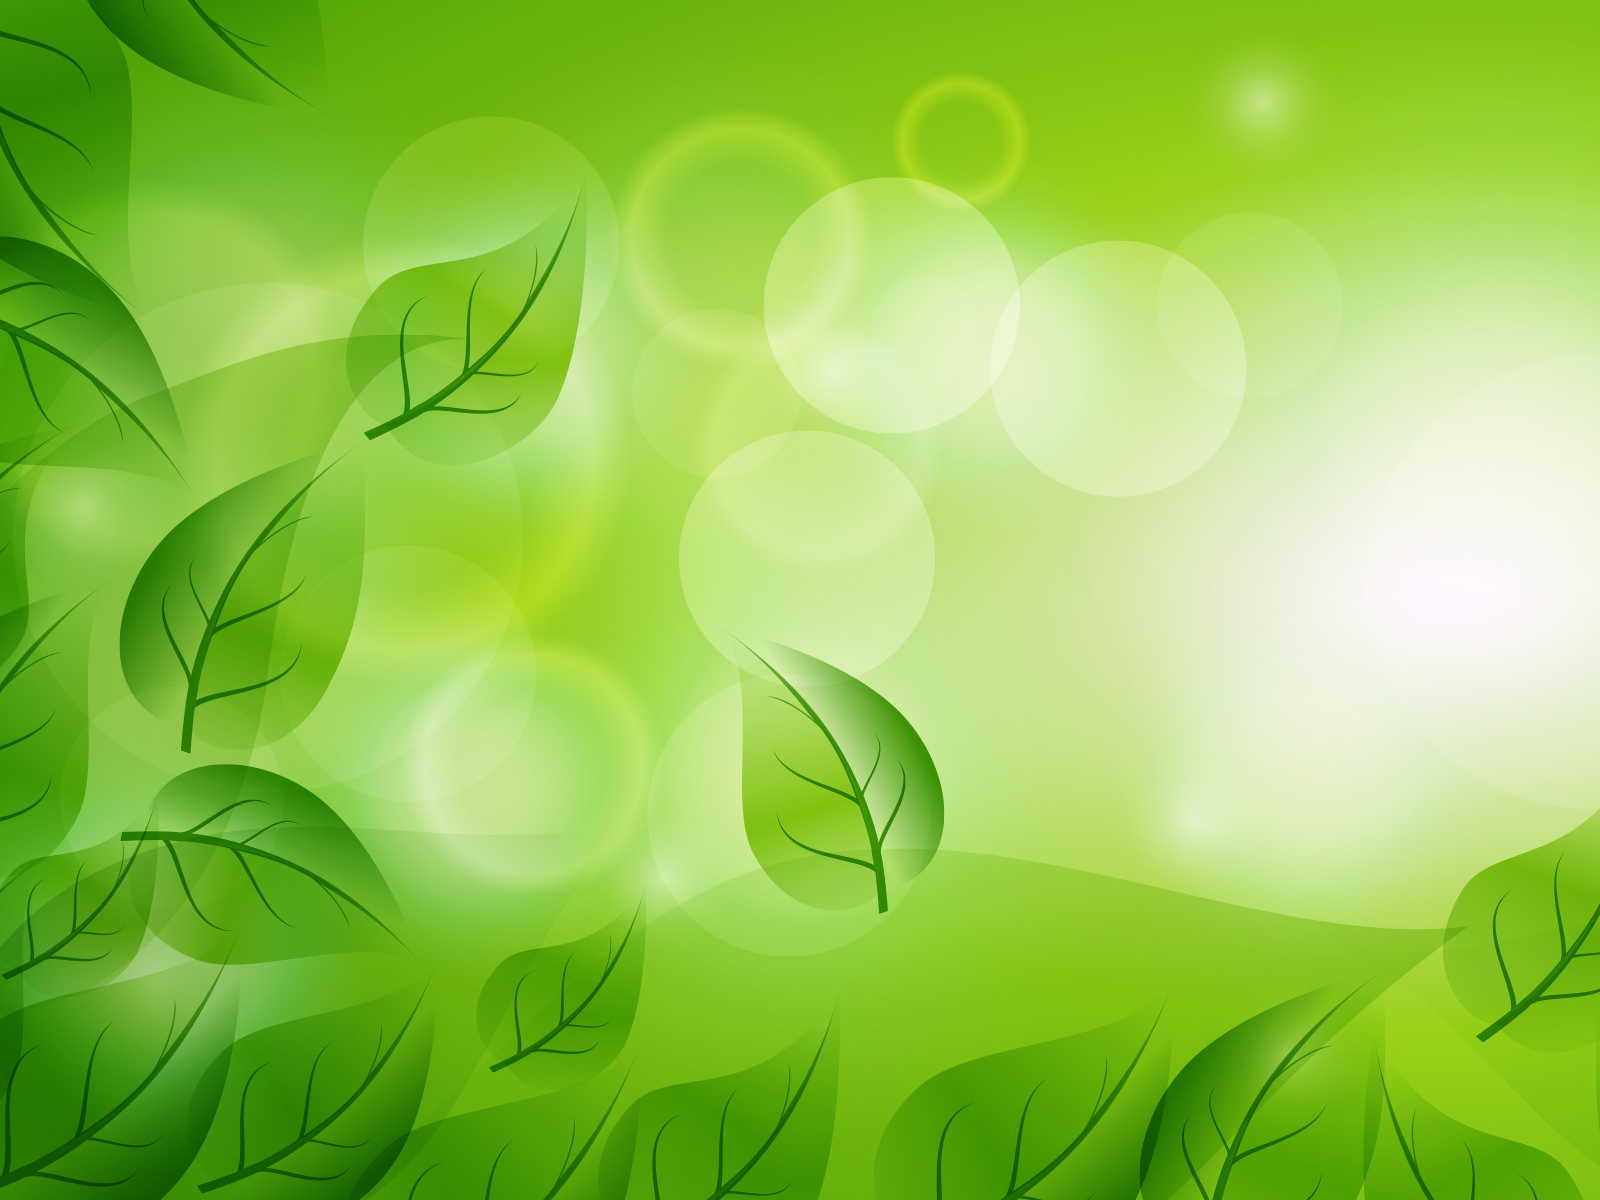 Abstraction Leaf Cuts Powerpoint Templates - Abstract, Green - Free PPT  Backgrounds and Templates